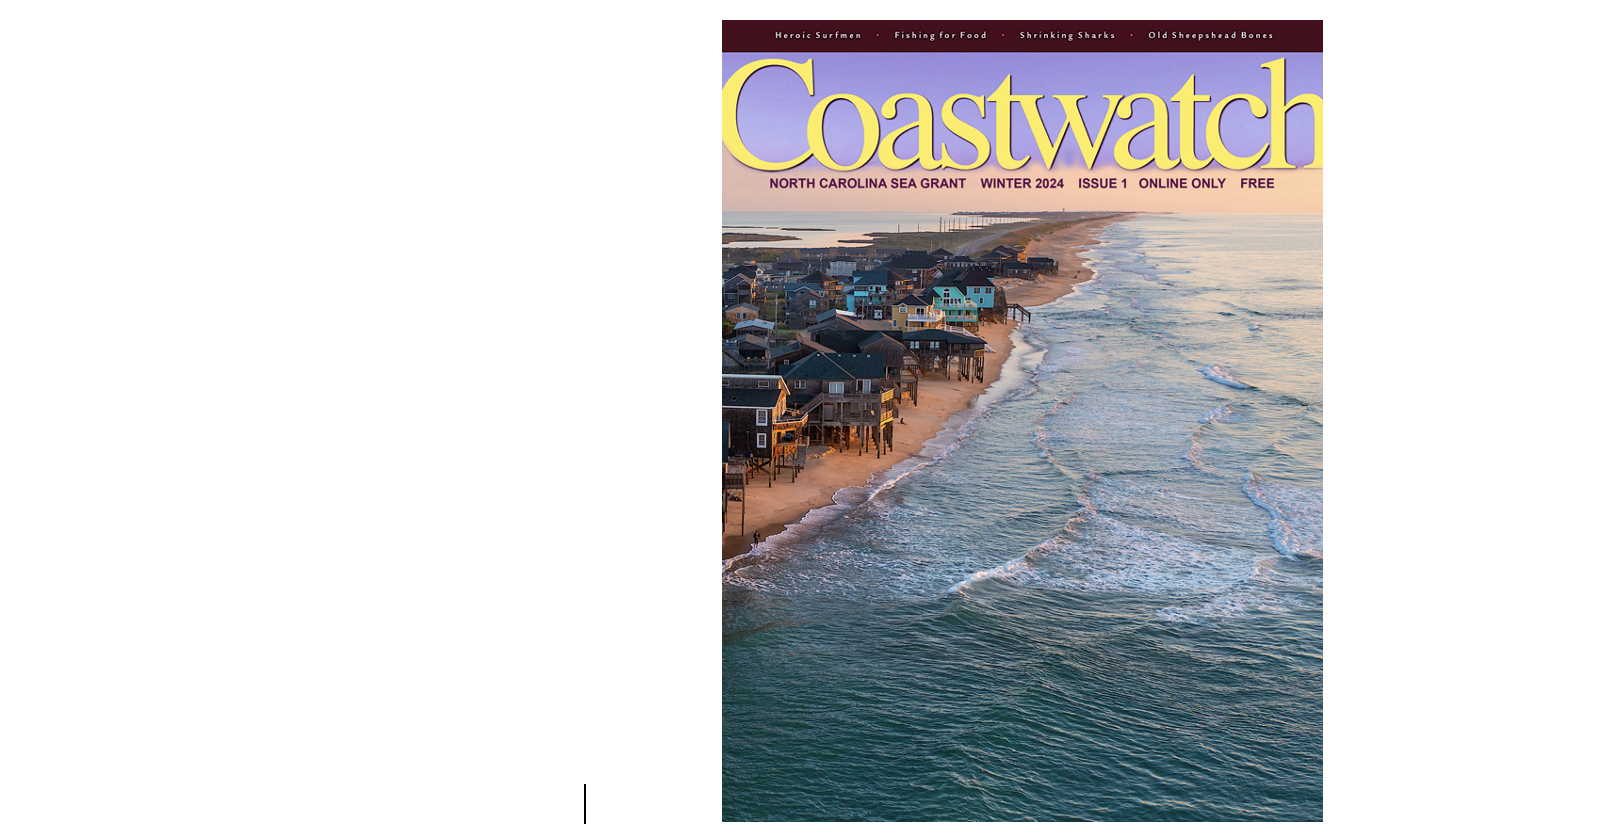 image: COASTWATCH WINTER 2024 cover.